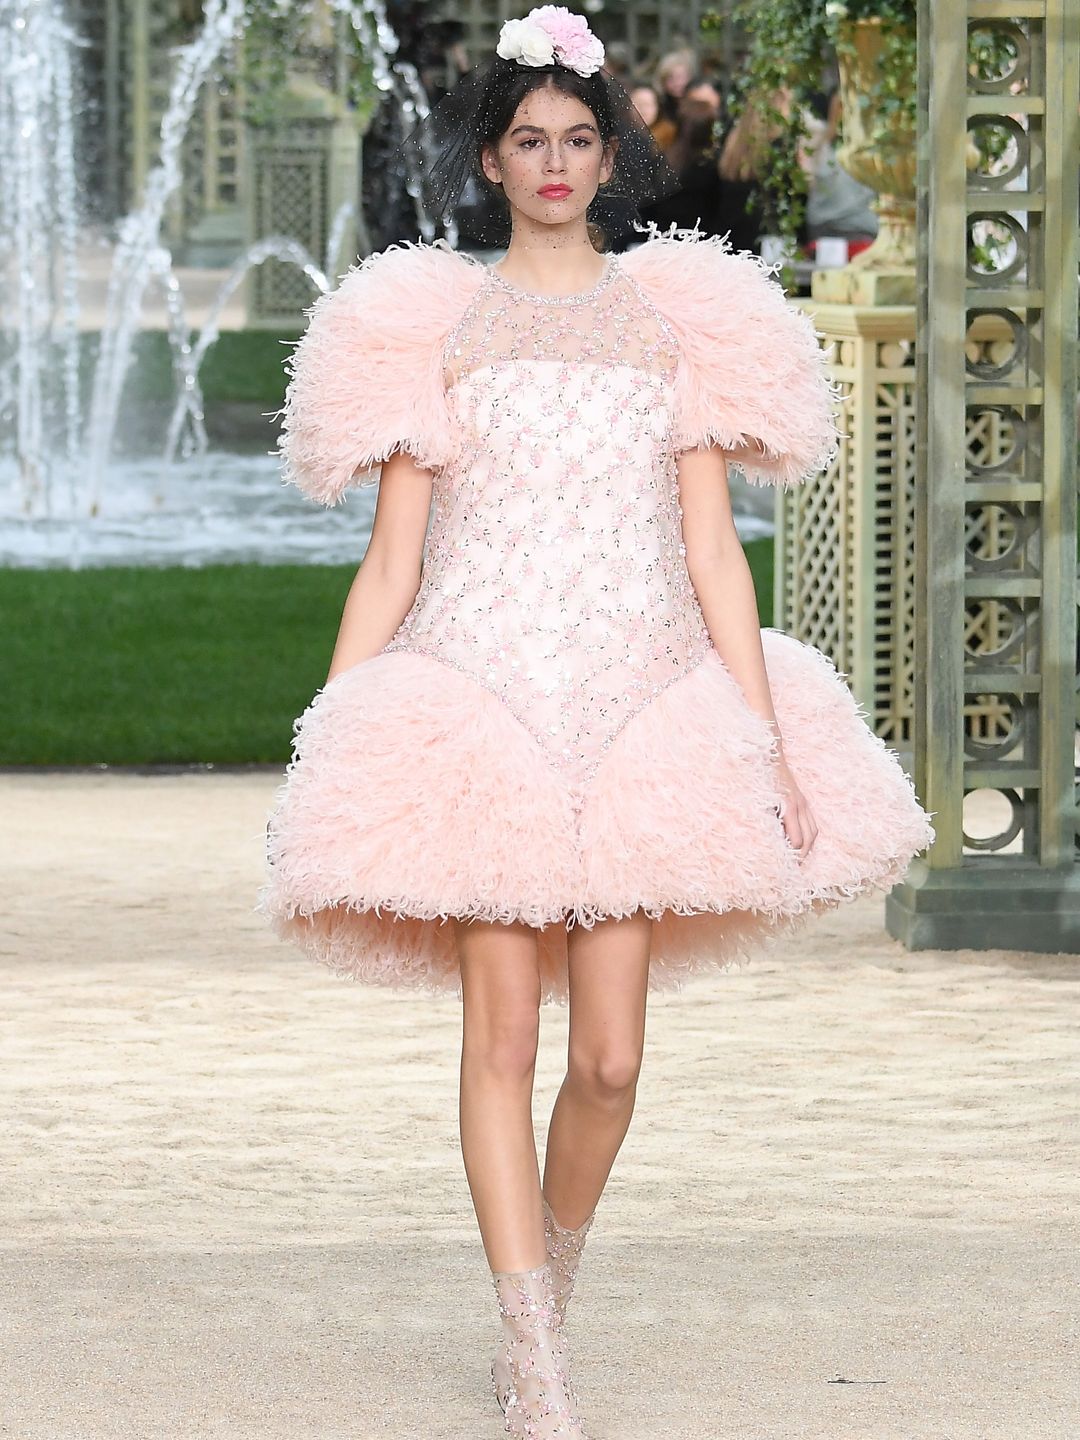 Kaia Gerber walking in Chanel's Haute Couture SS18 show 